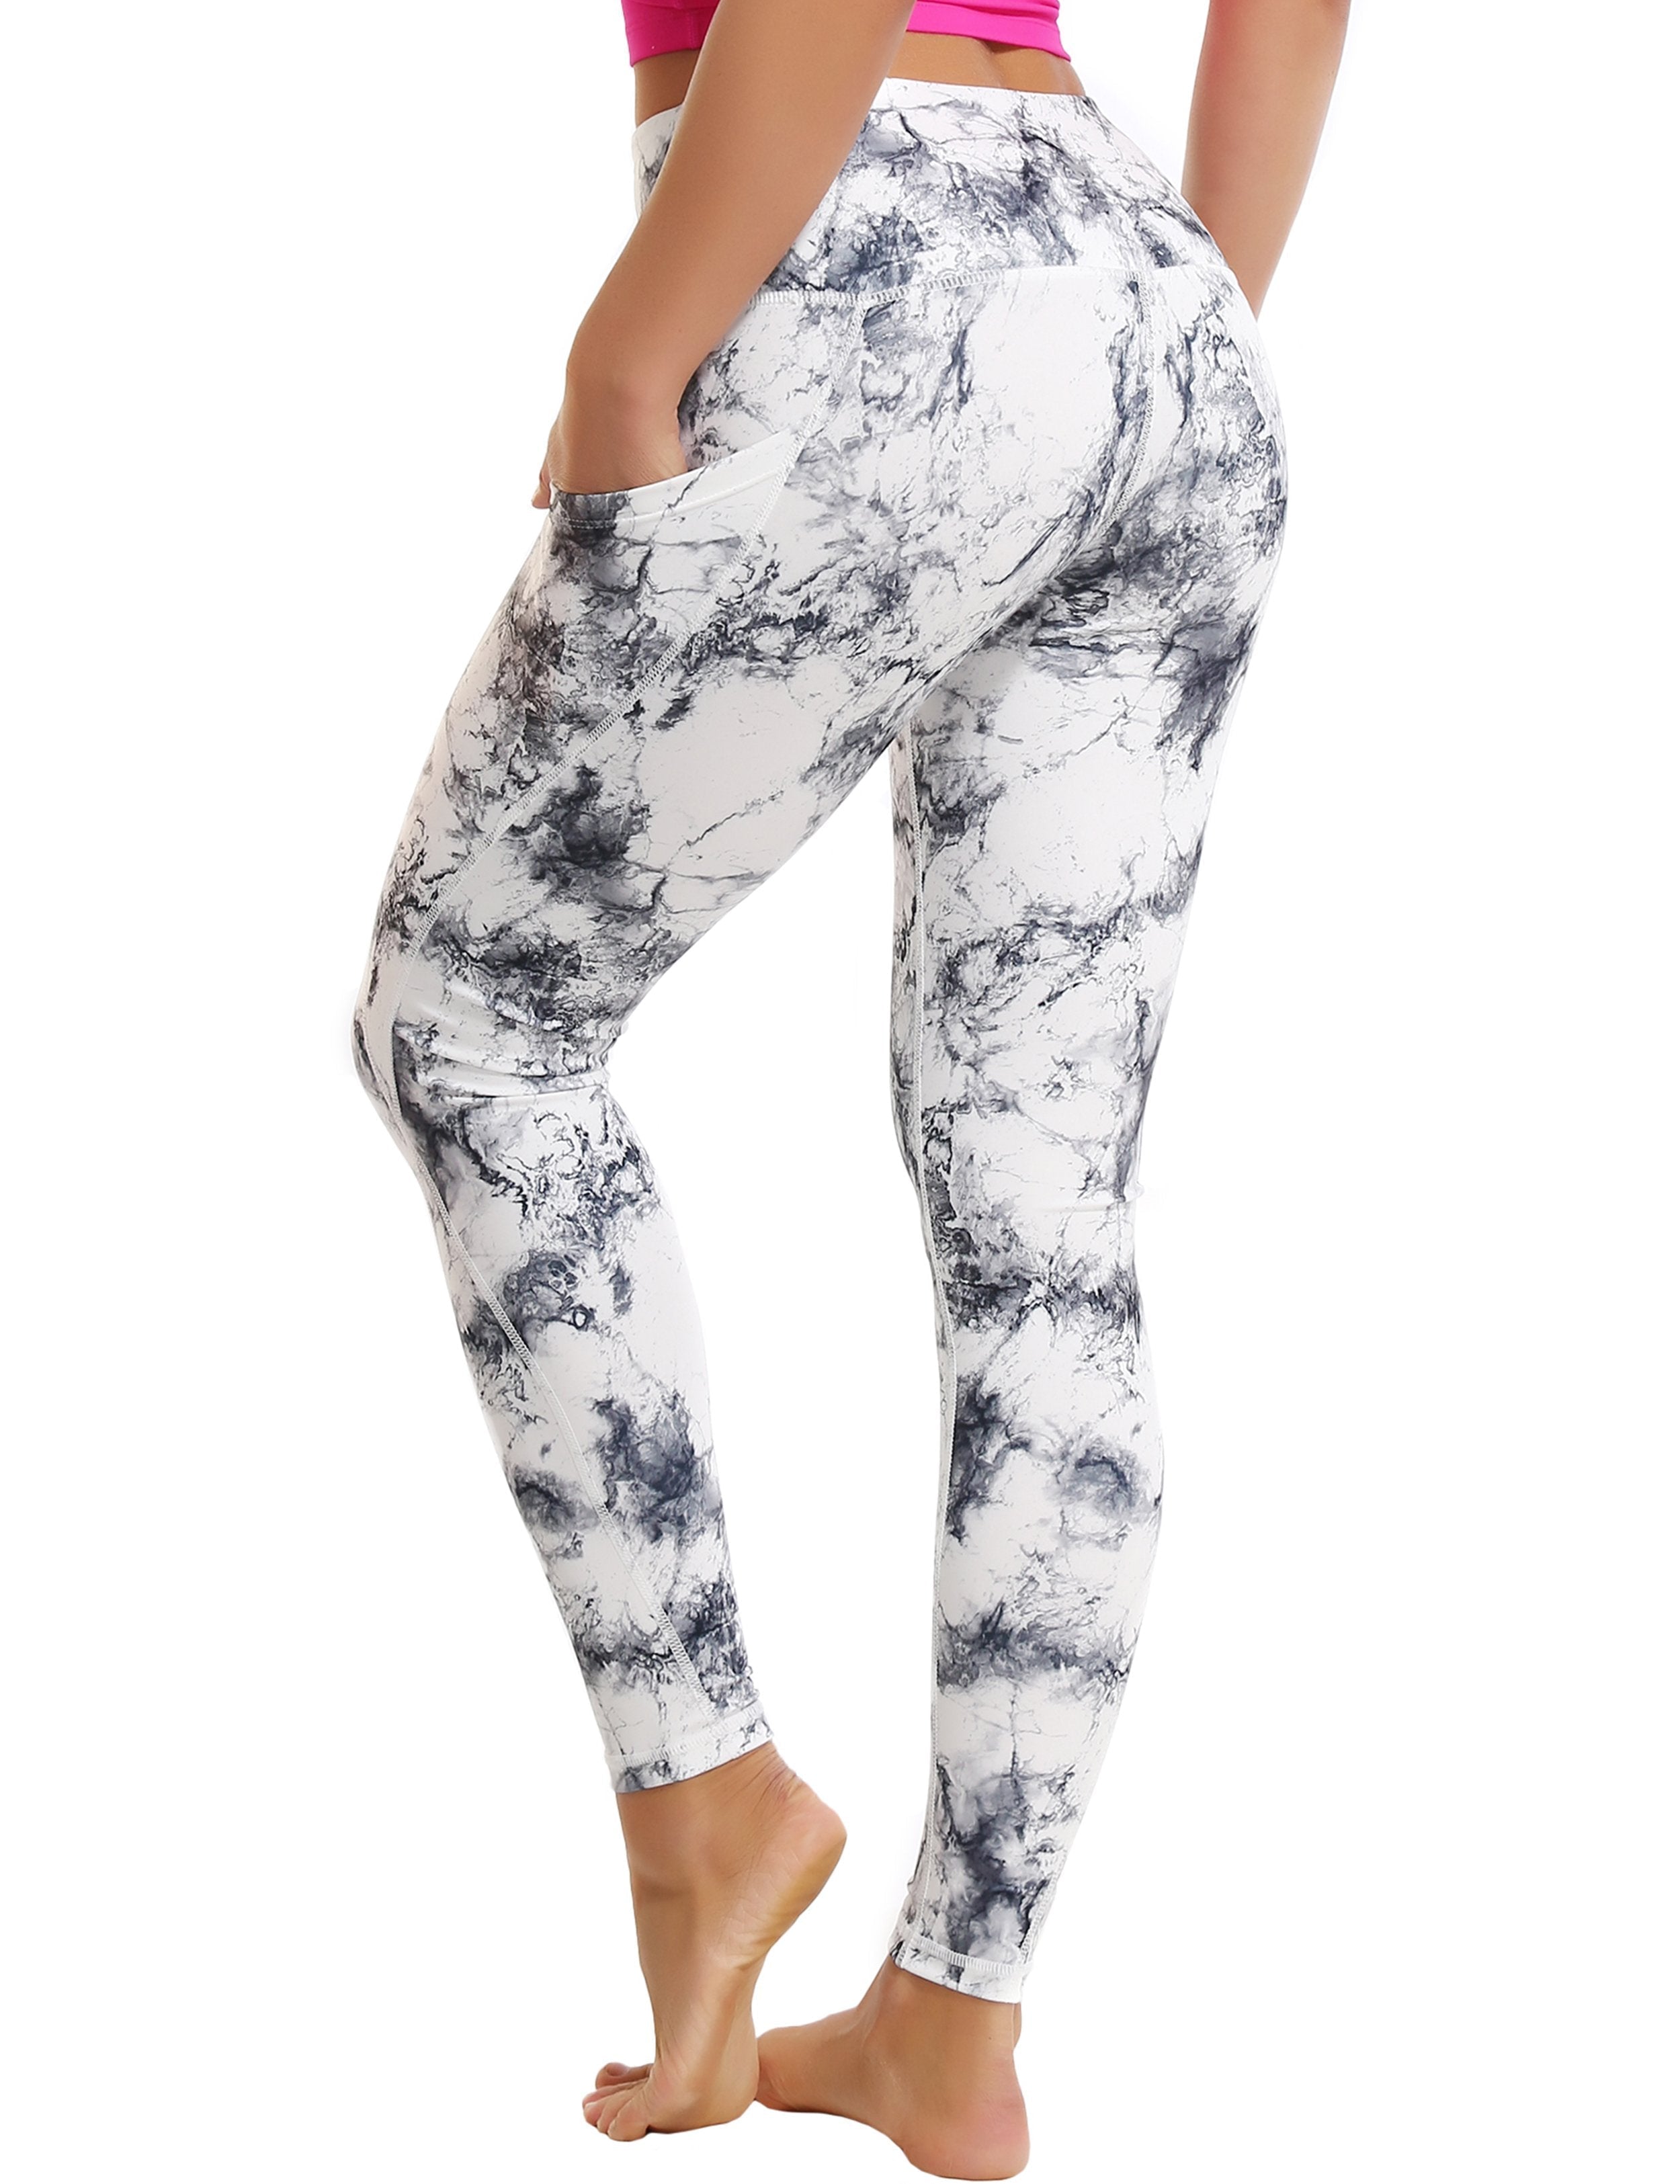 High Waist Side Pockets yogastudio Pants arabescato 78%Polyester/22%Spandex Fabric doesn't attract lint easily 4-way stretch No see-through Moisture-wicking Tummy control Inner pocket